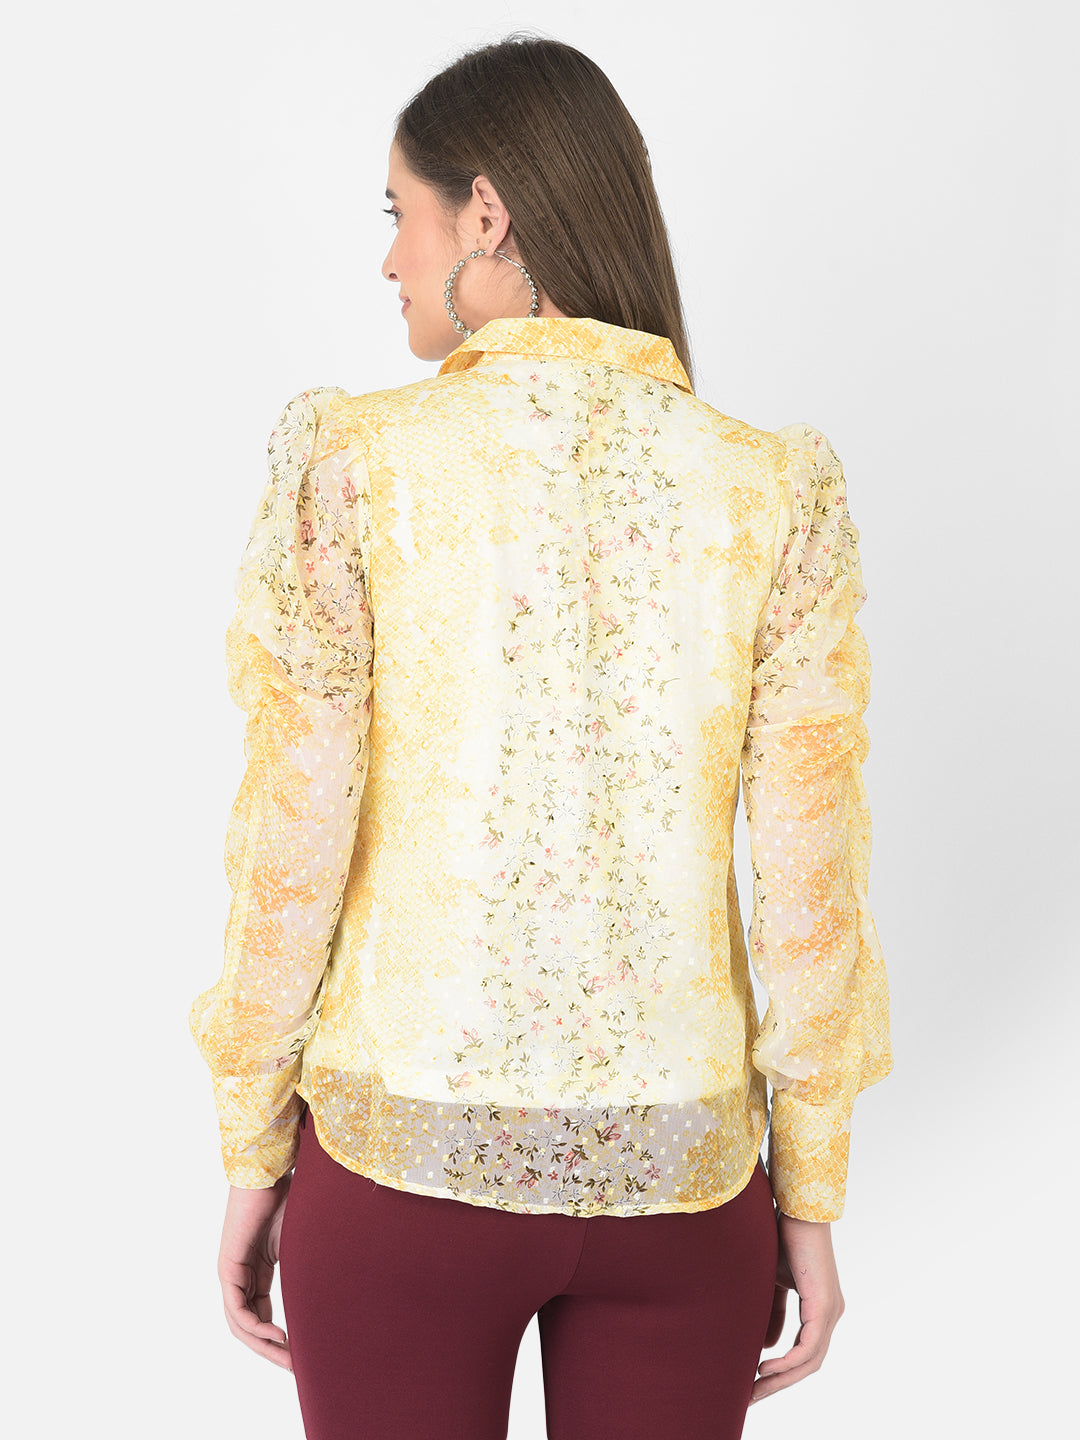 Yellow Shirt Collar Long Sleeves Printed Top For Casual Wear